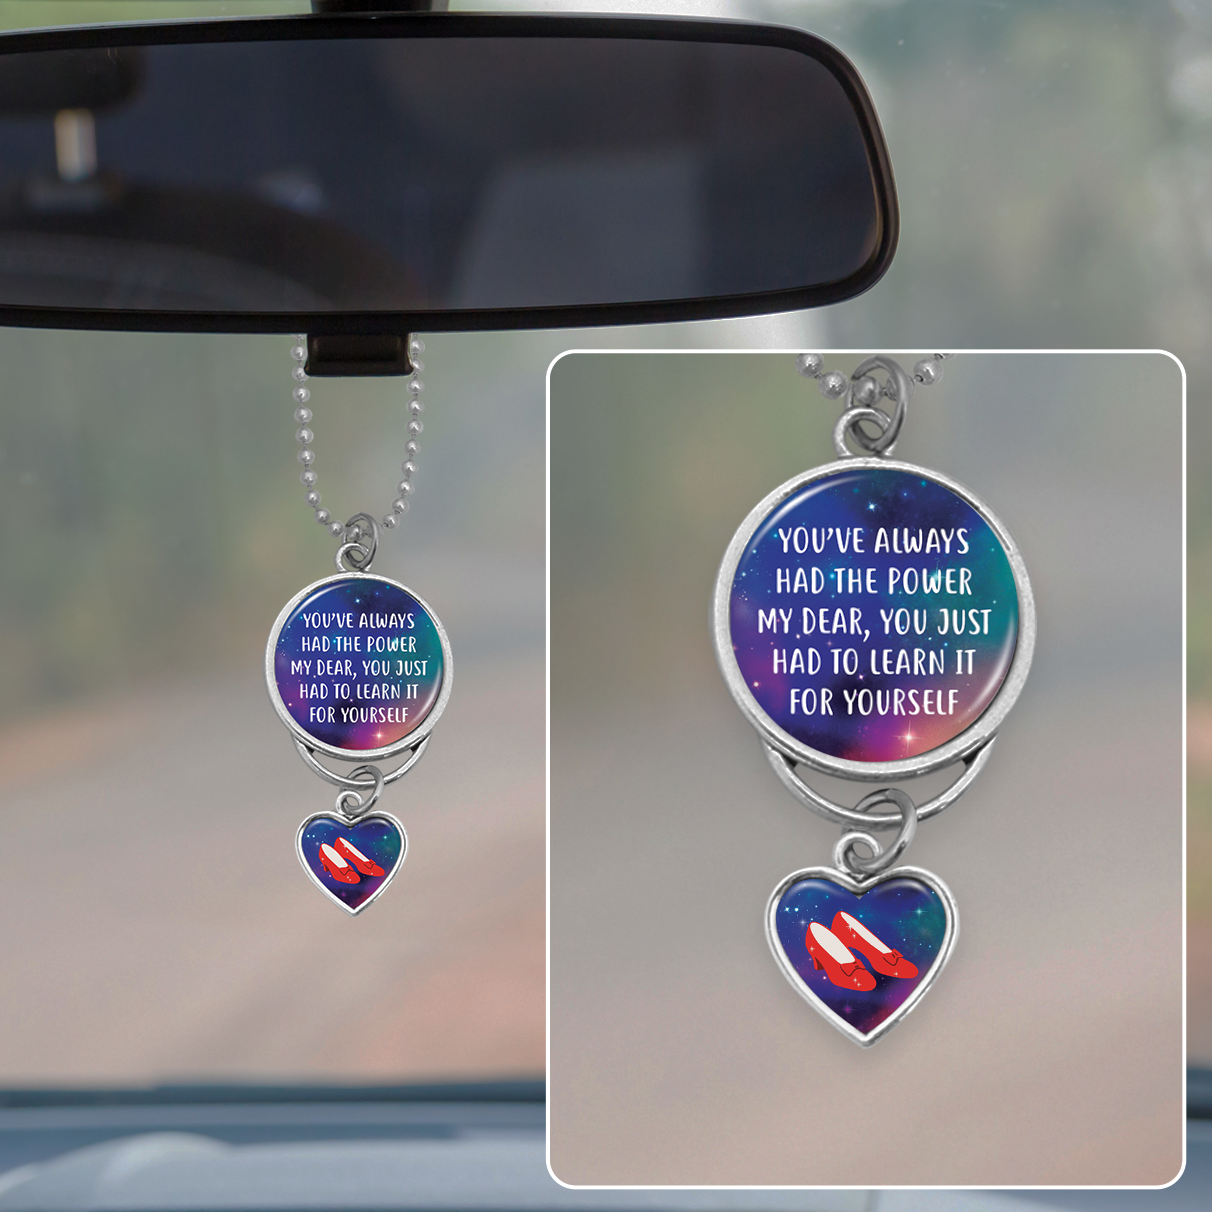 Learn It Yourself Rearview Mirror Charm